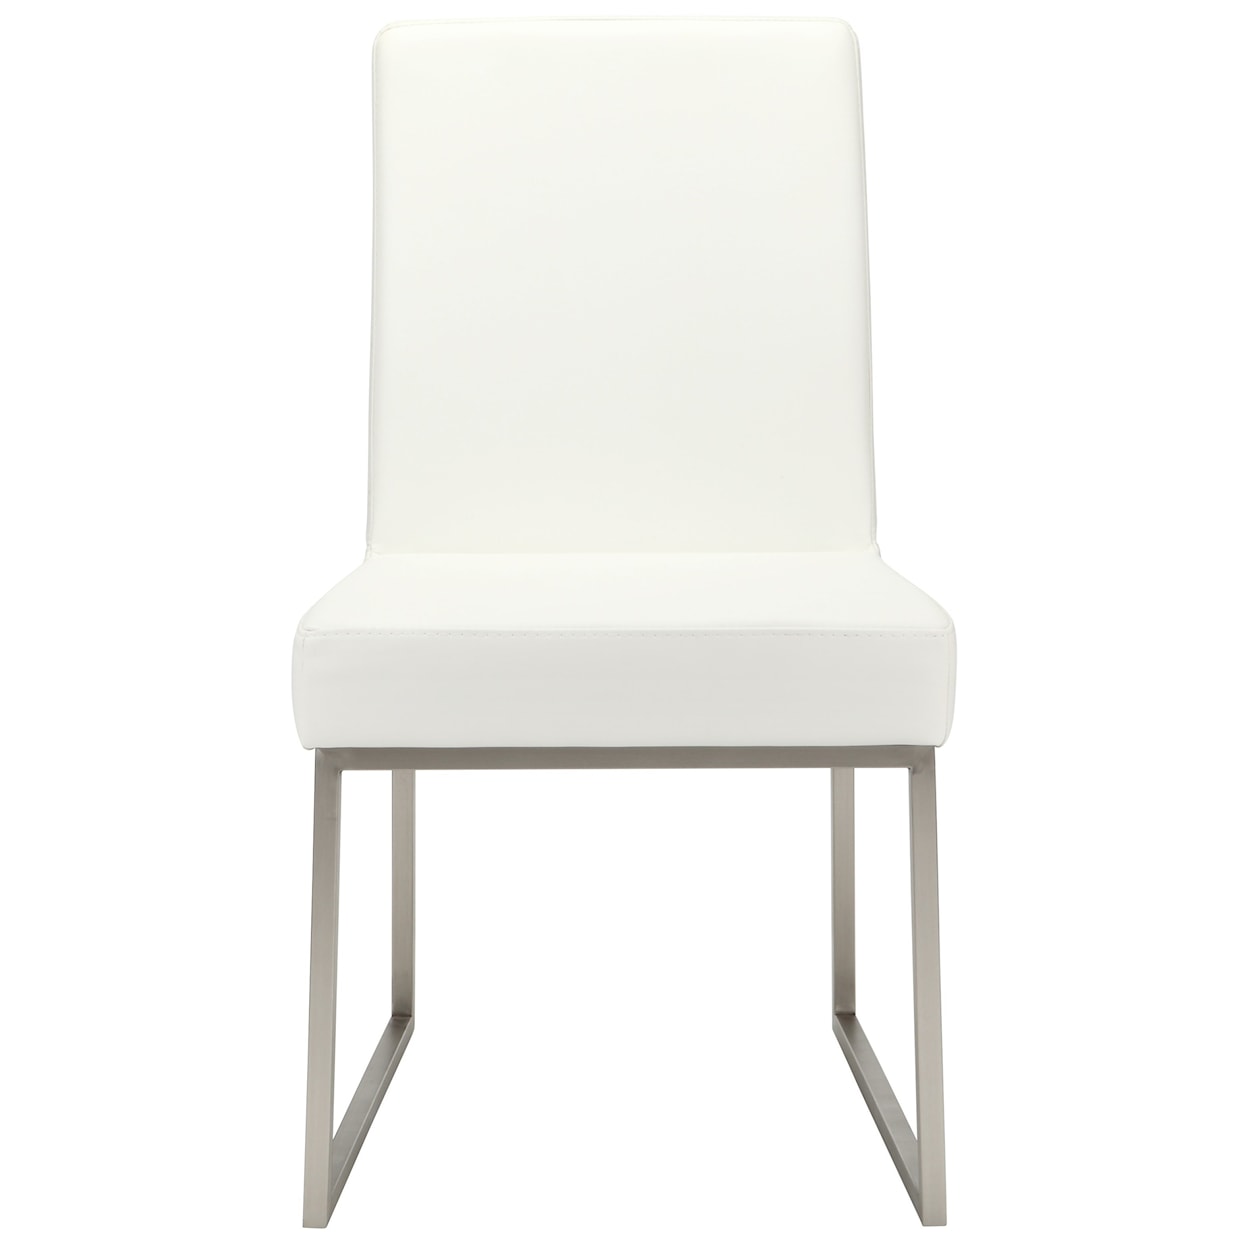 Moe's Home Collection Tyson White Dining Chair